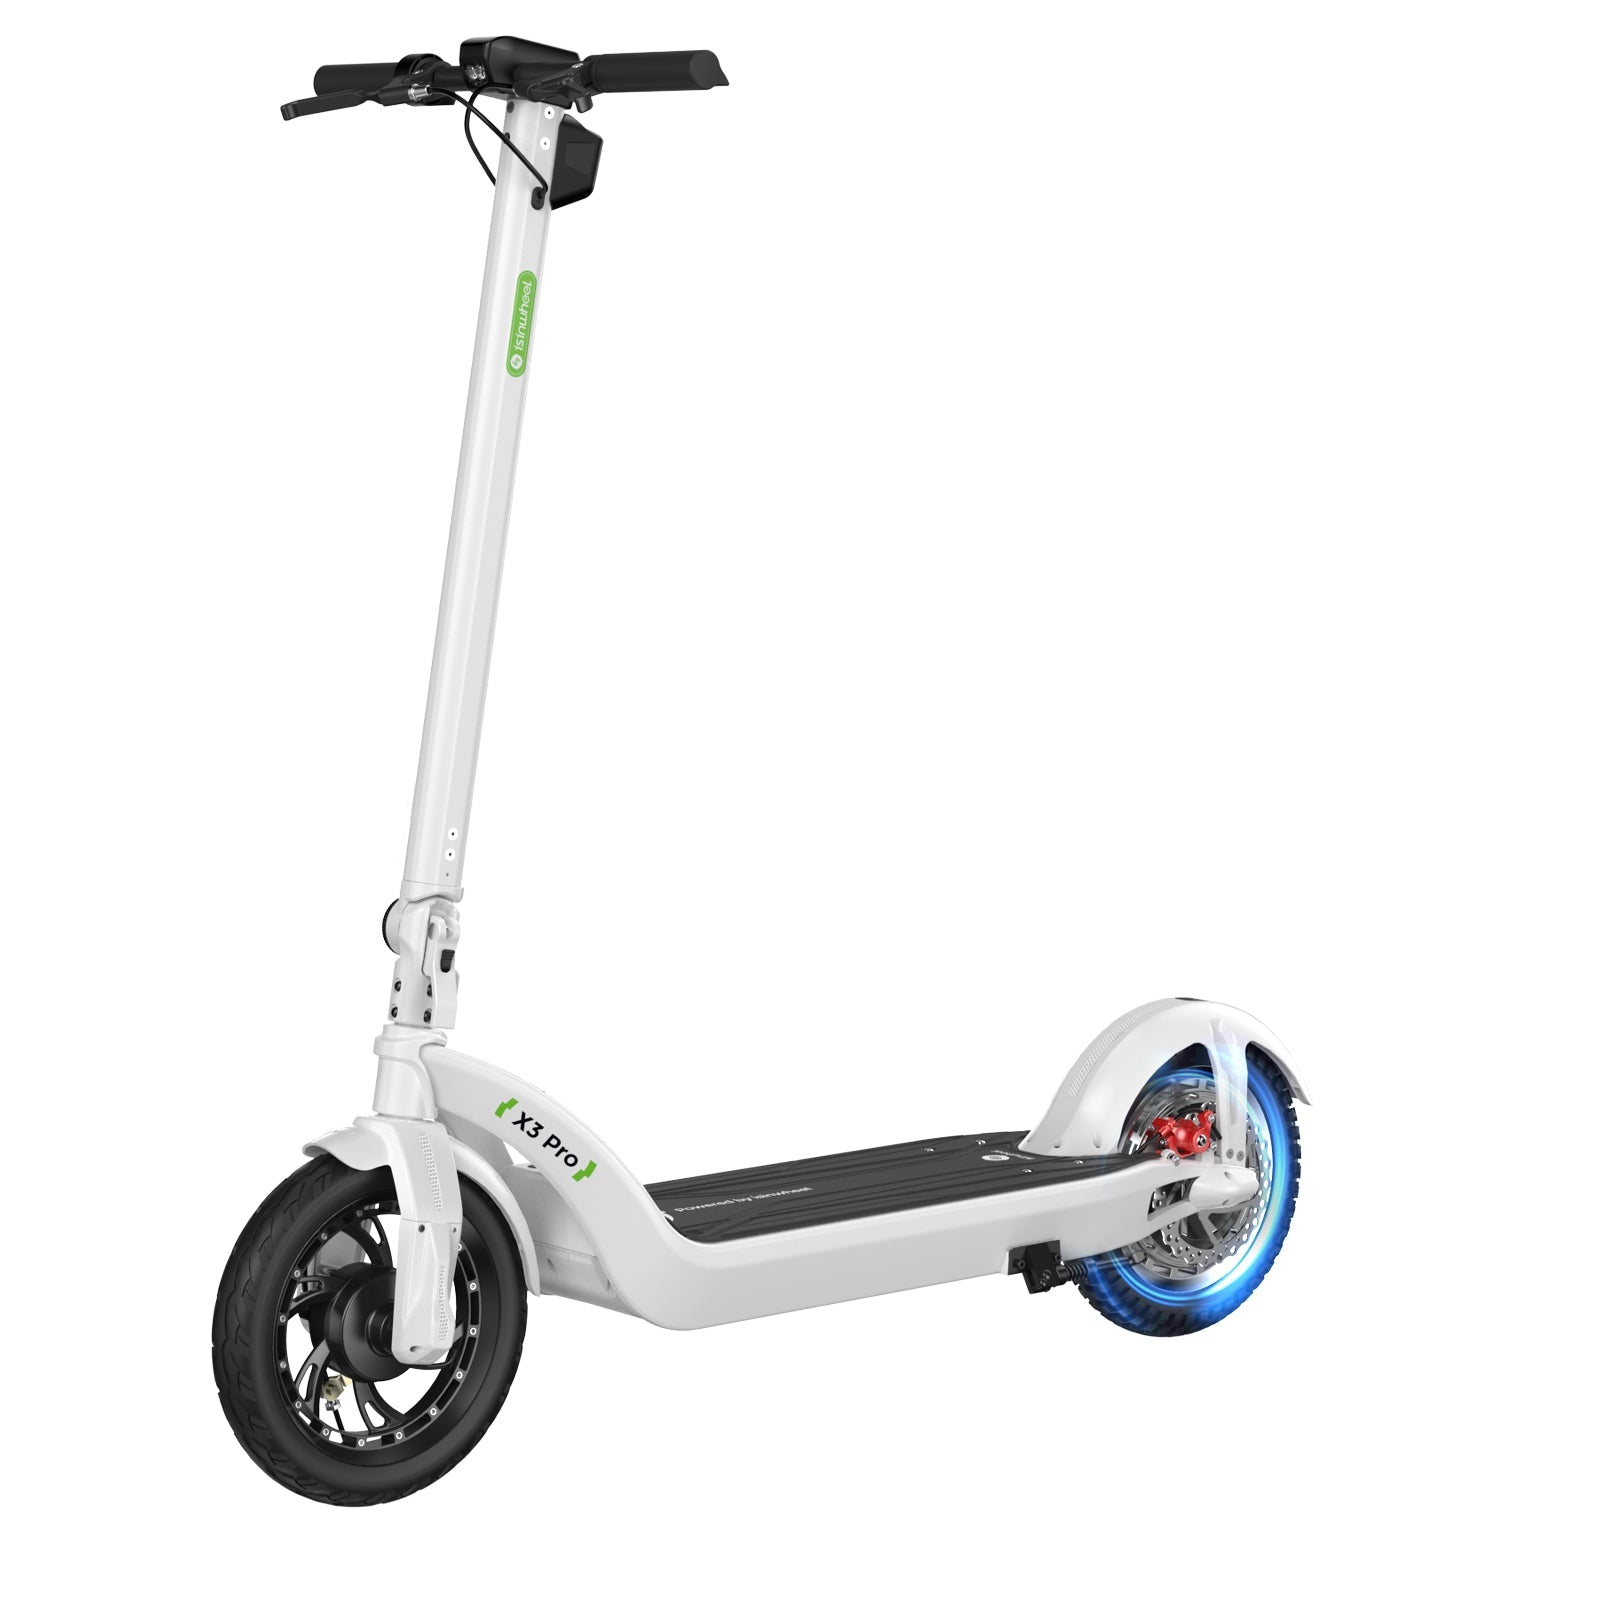 Scooter 1200W | Electric isinwheel Commuting X3Pro